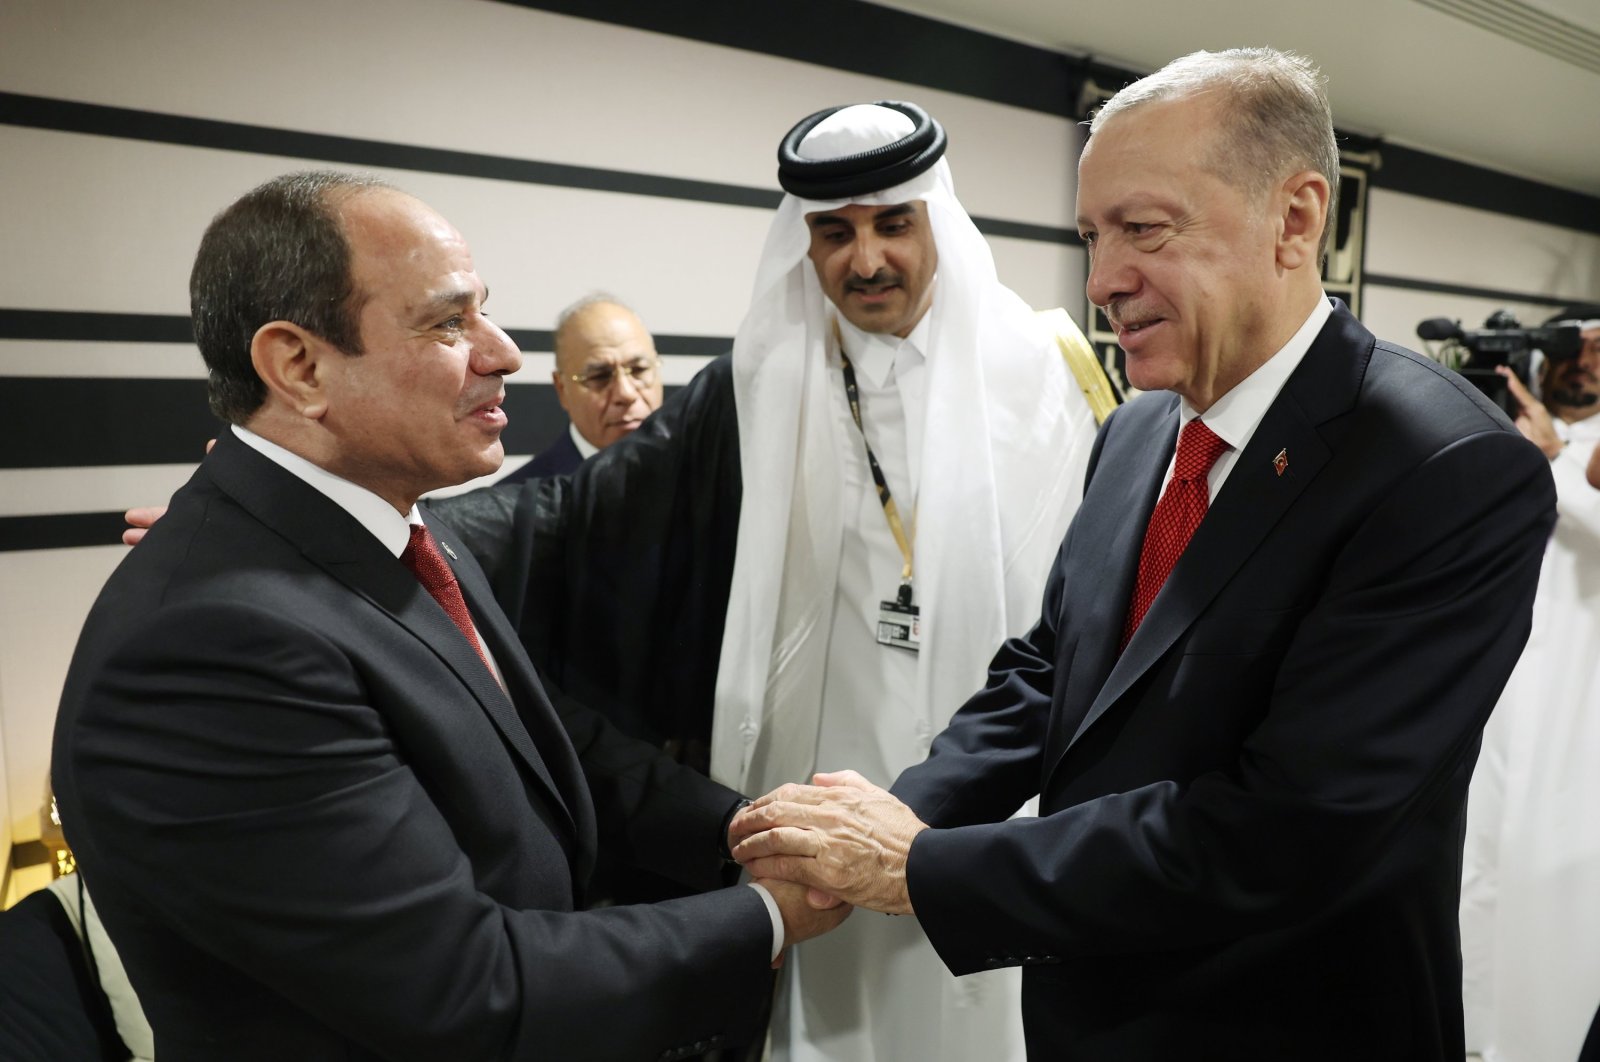 President Recep Tayyip Erdoğan shakes hands with his Egyptian counterpart Abdel-Fattah el-Sissi (L) during their meeting at the opening ceremony of the World Cup in Doha, Qatar, Nov. 20, 2022. (EPA File Photo)